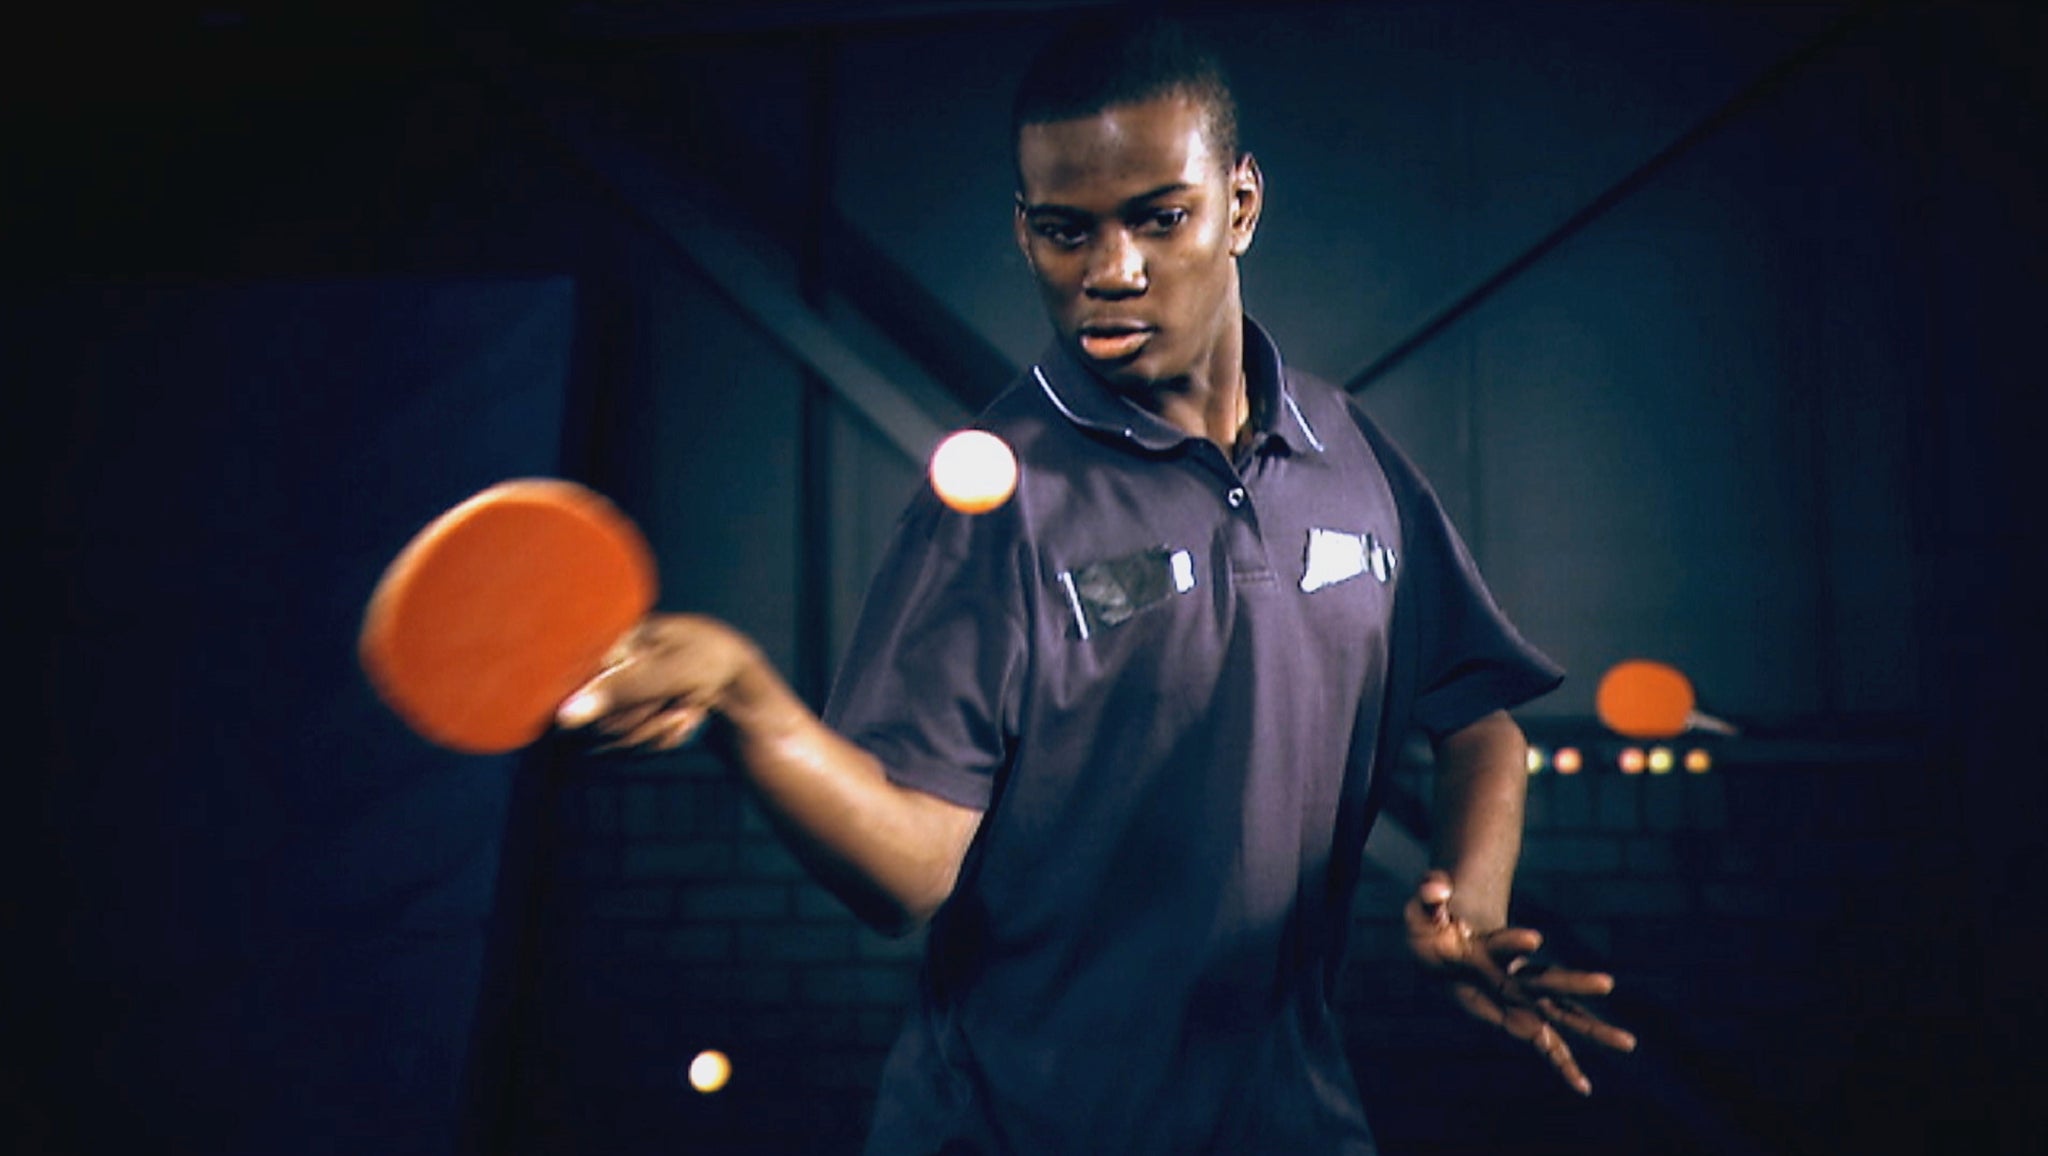 Ashley, 19, has transformed his life after training to be a professional table tennis player